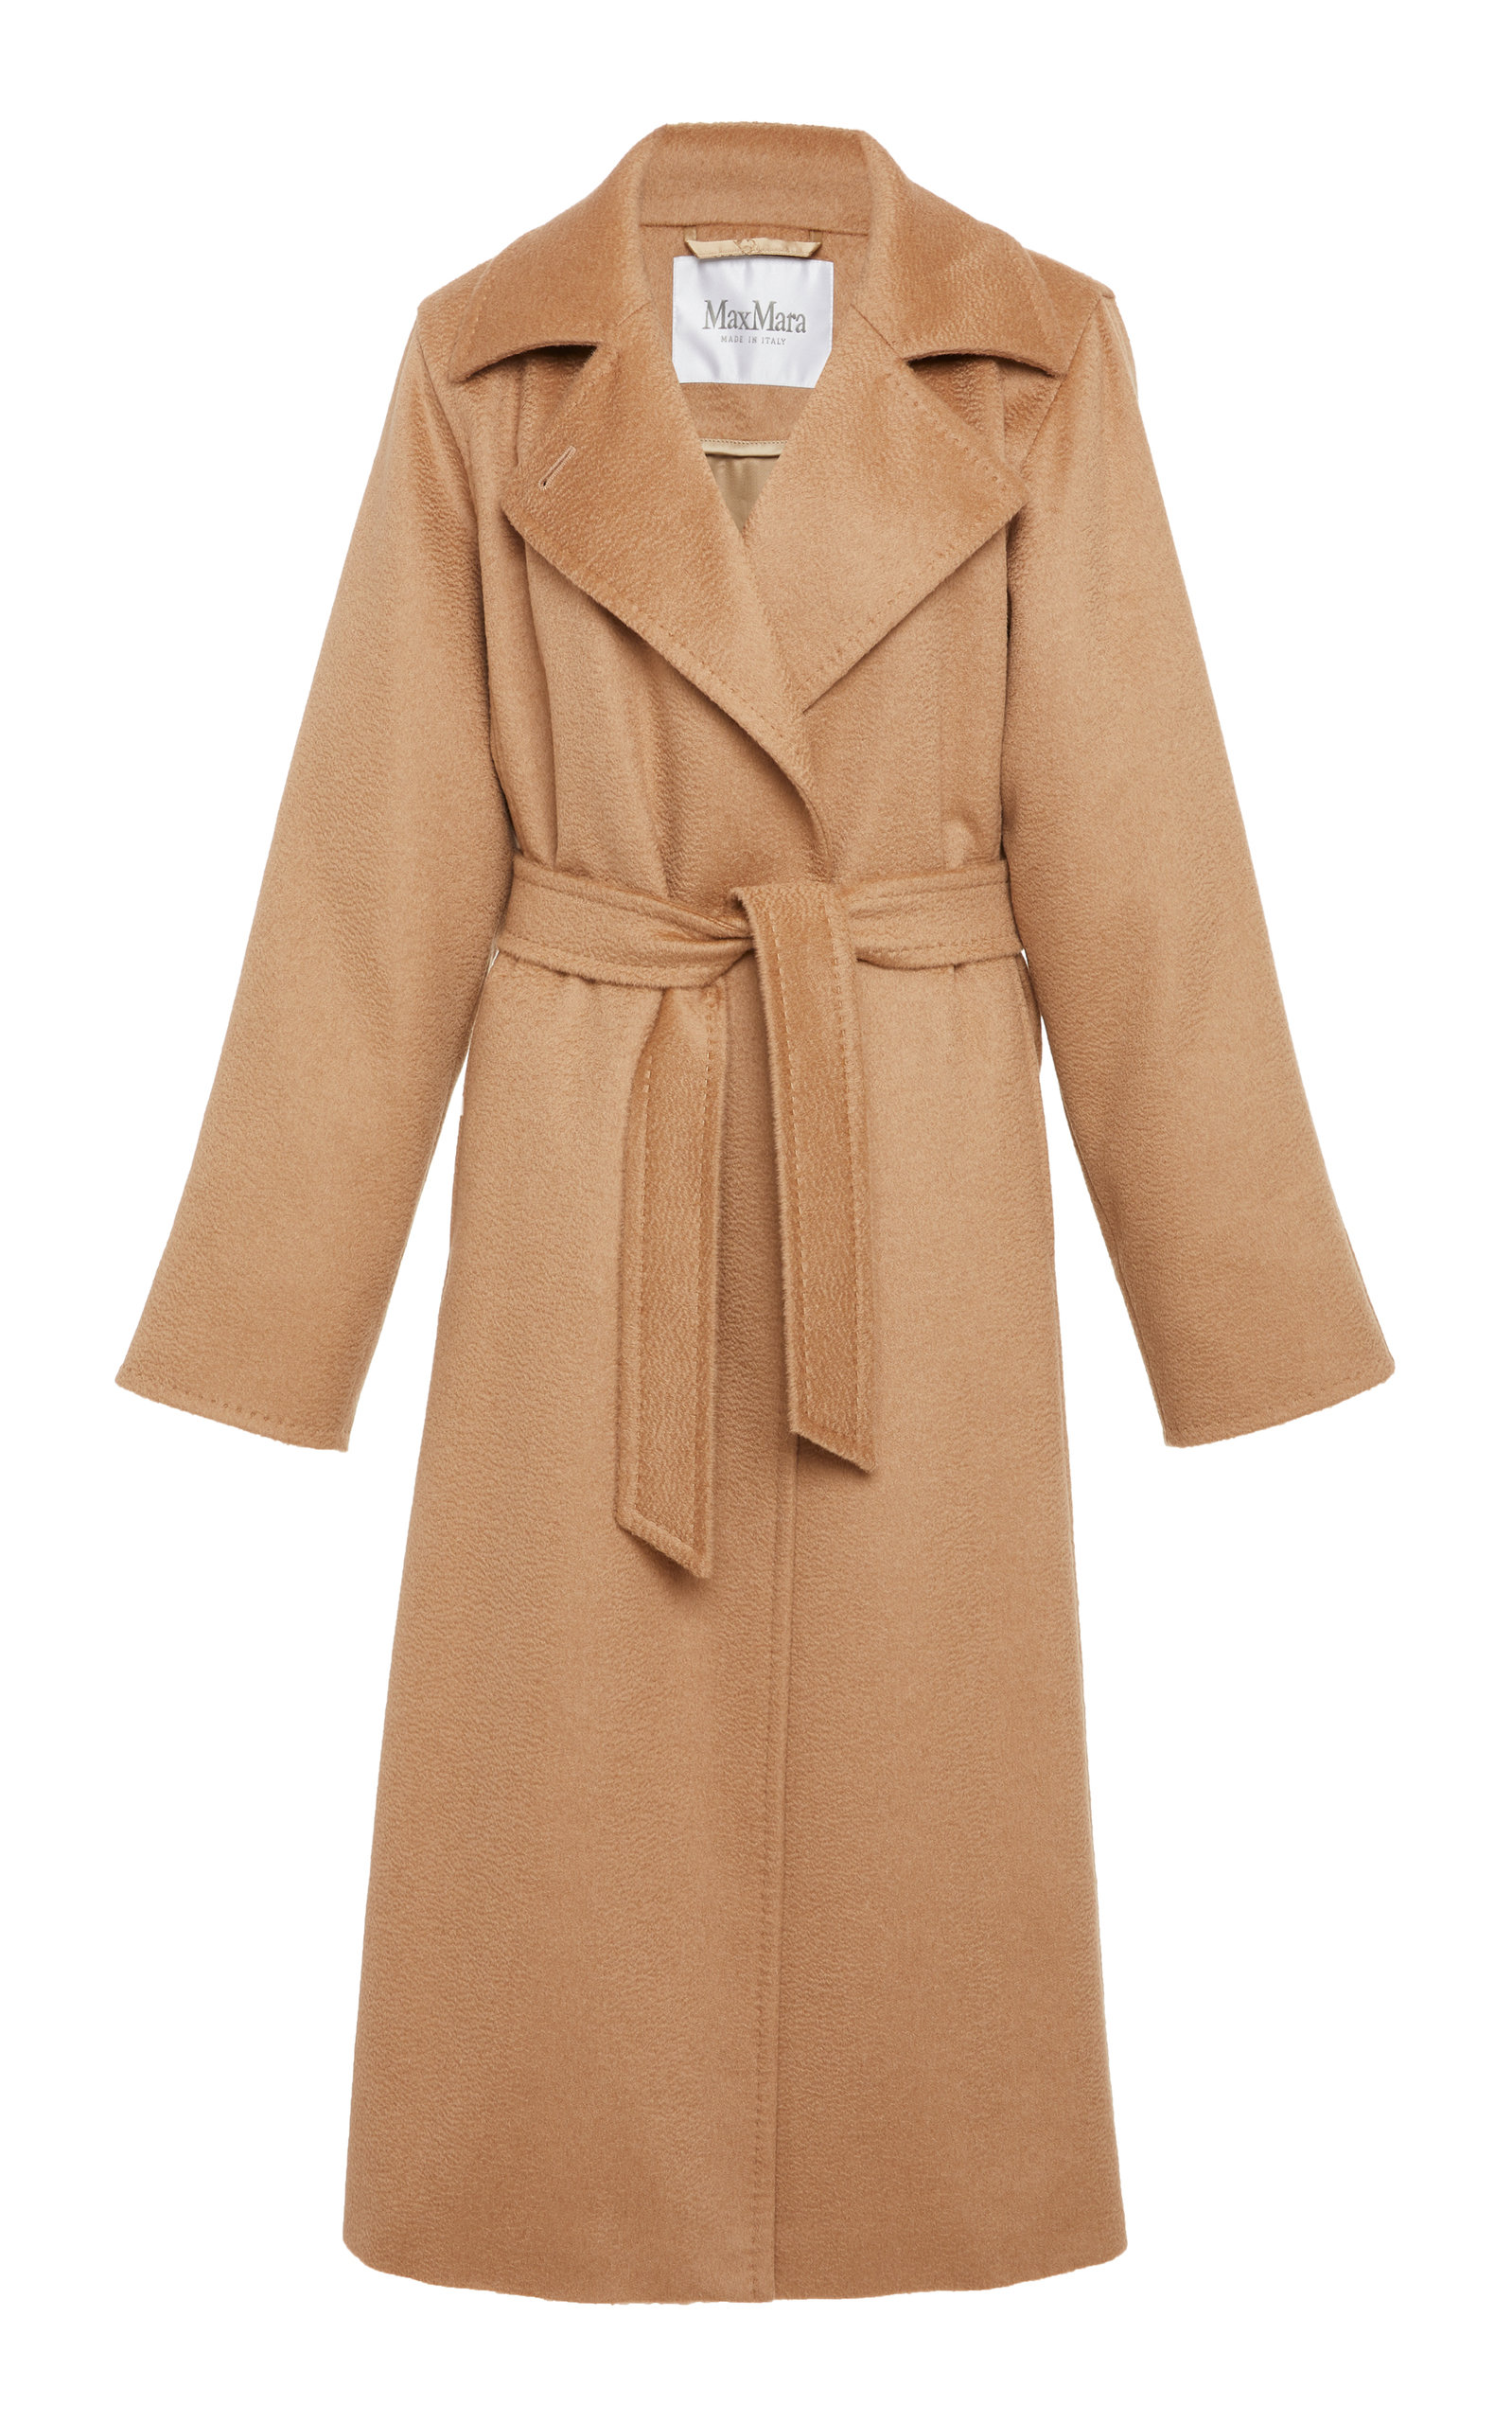 Max Mara - Manuela Belted Camel Hair Coat | ABOUT ICONS